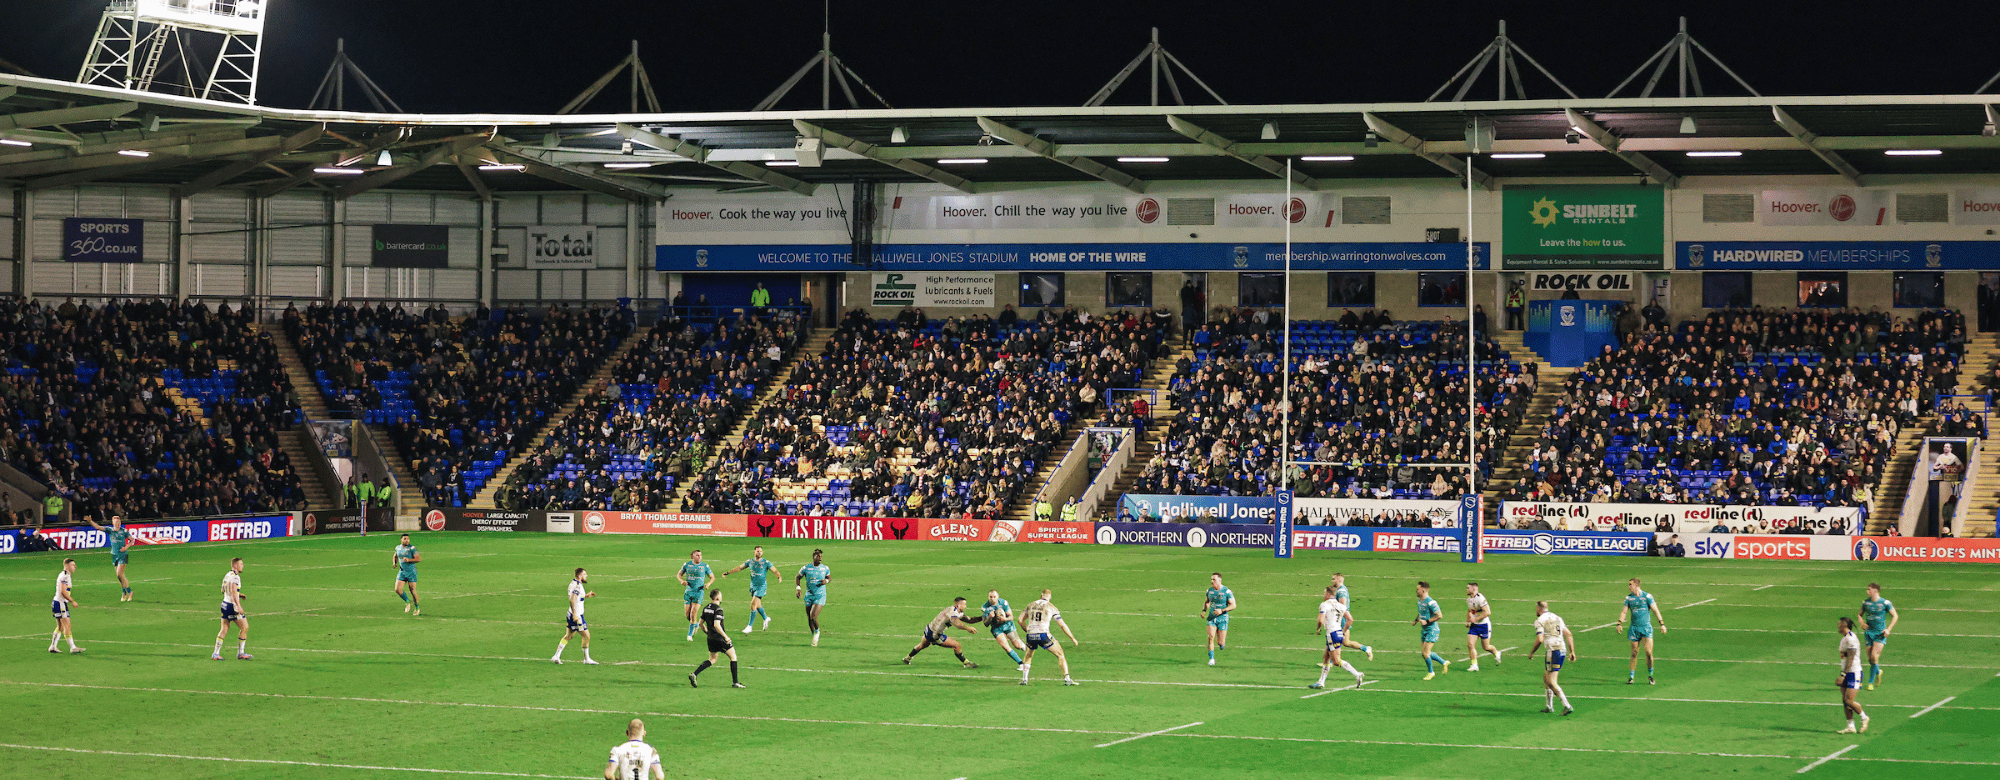 Tickets & Travel For Warrington Trip Now On Sale